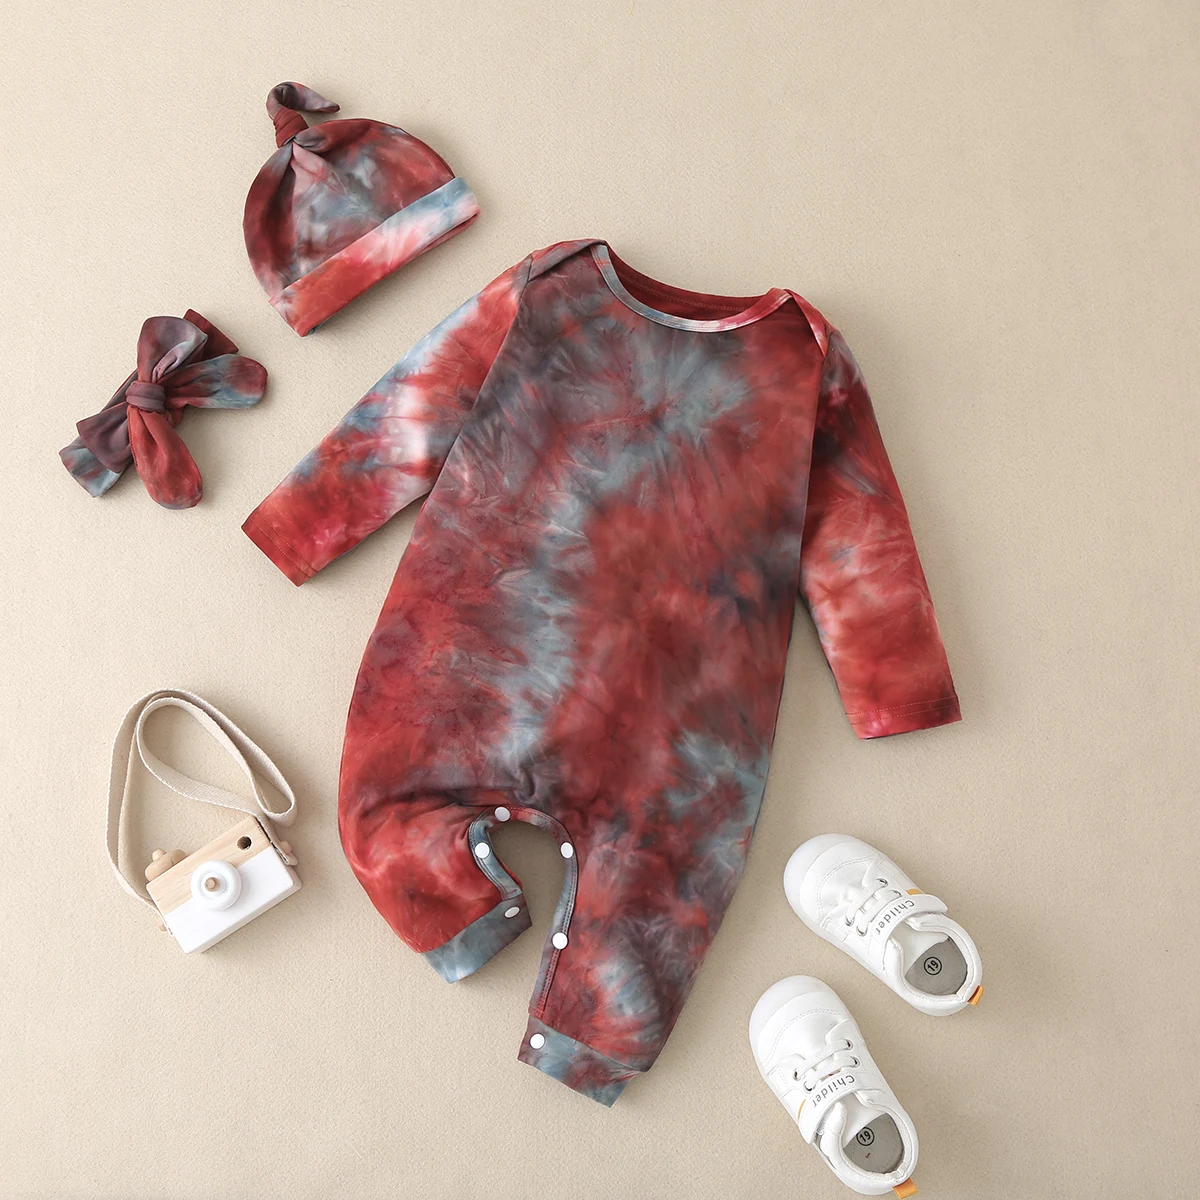 

Newborn jumpsuit children's clothing baby tie-dye pattern jumpsuit with hat and headband suitable for 3-24 months baby